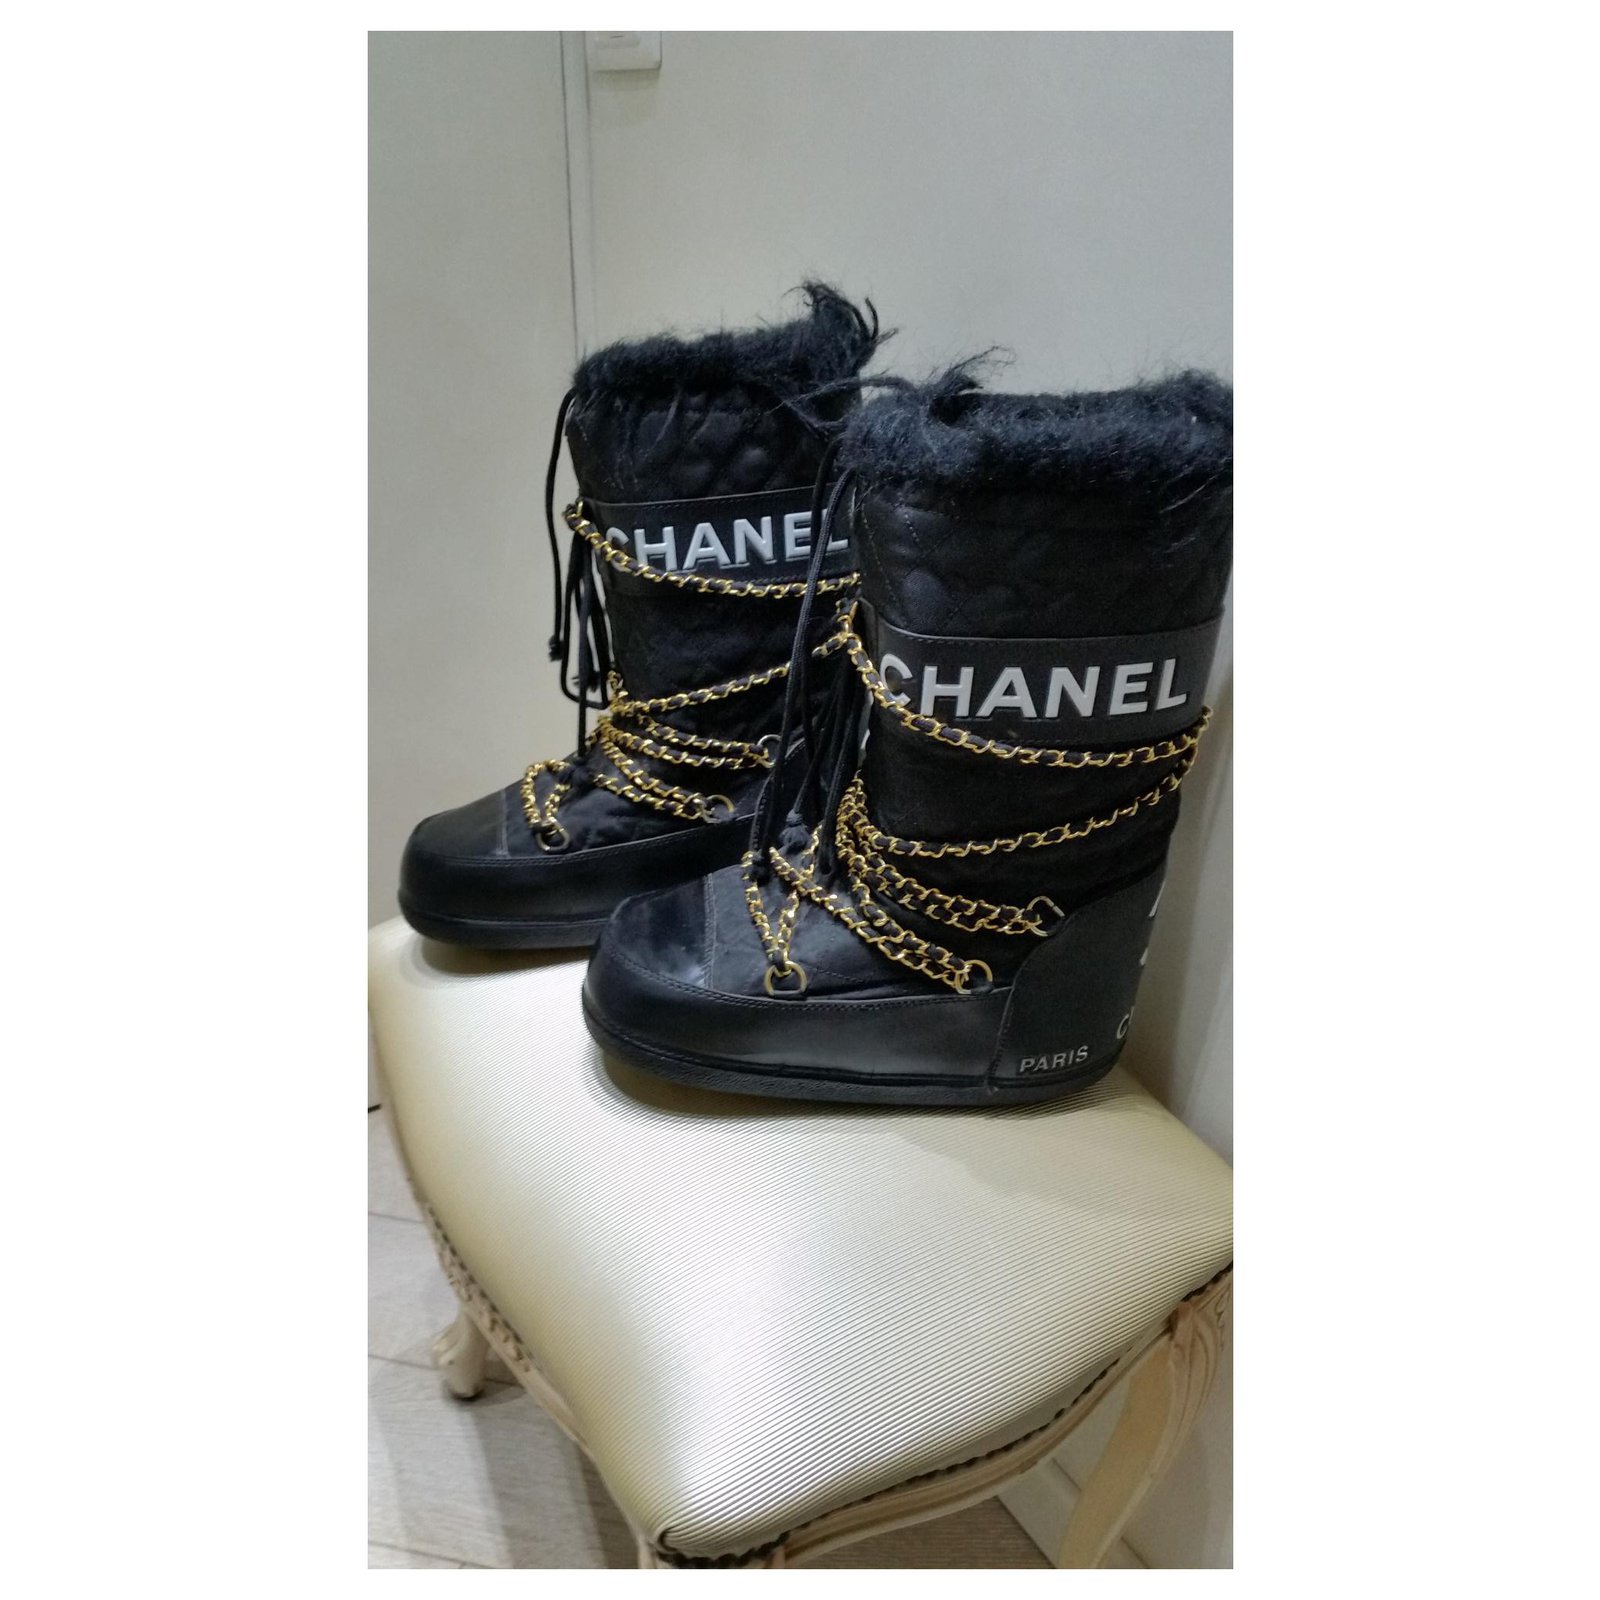 Chanel Moon Boots - Black Boots, Shoes - CHA81842